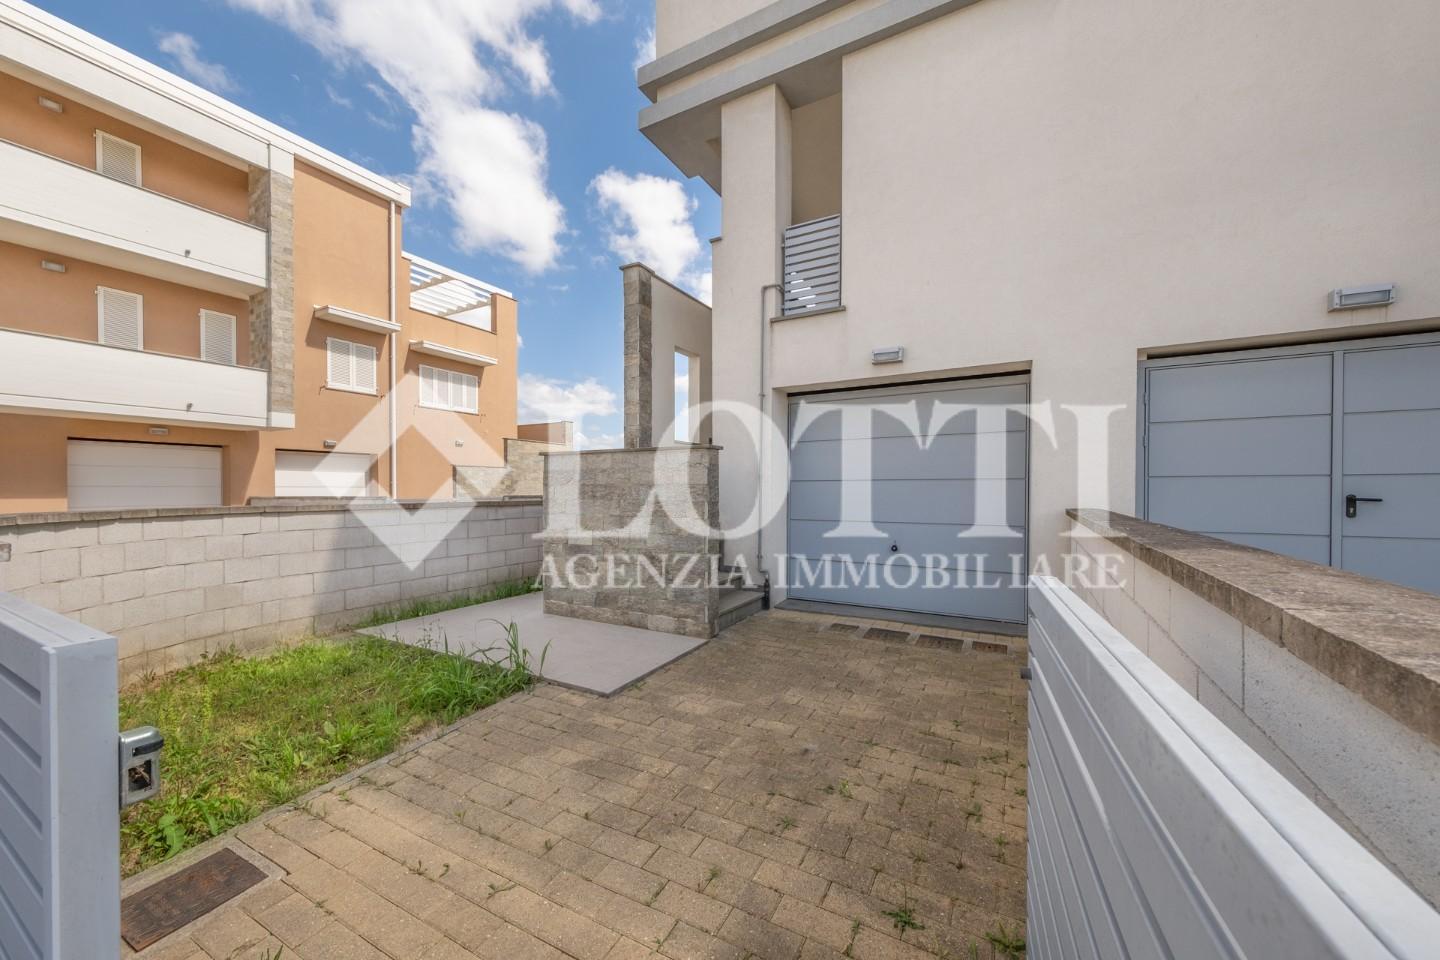 Apartment for sale, ref. 822- A